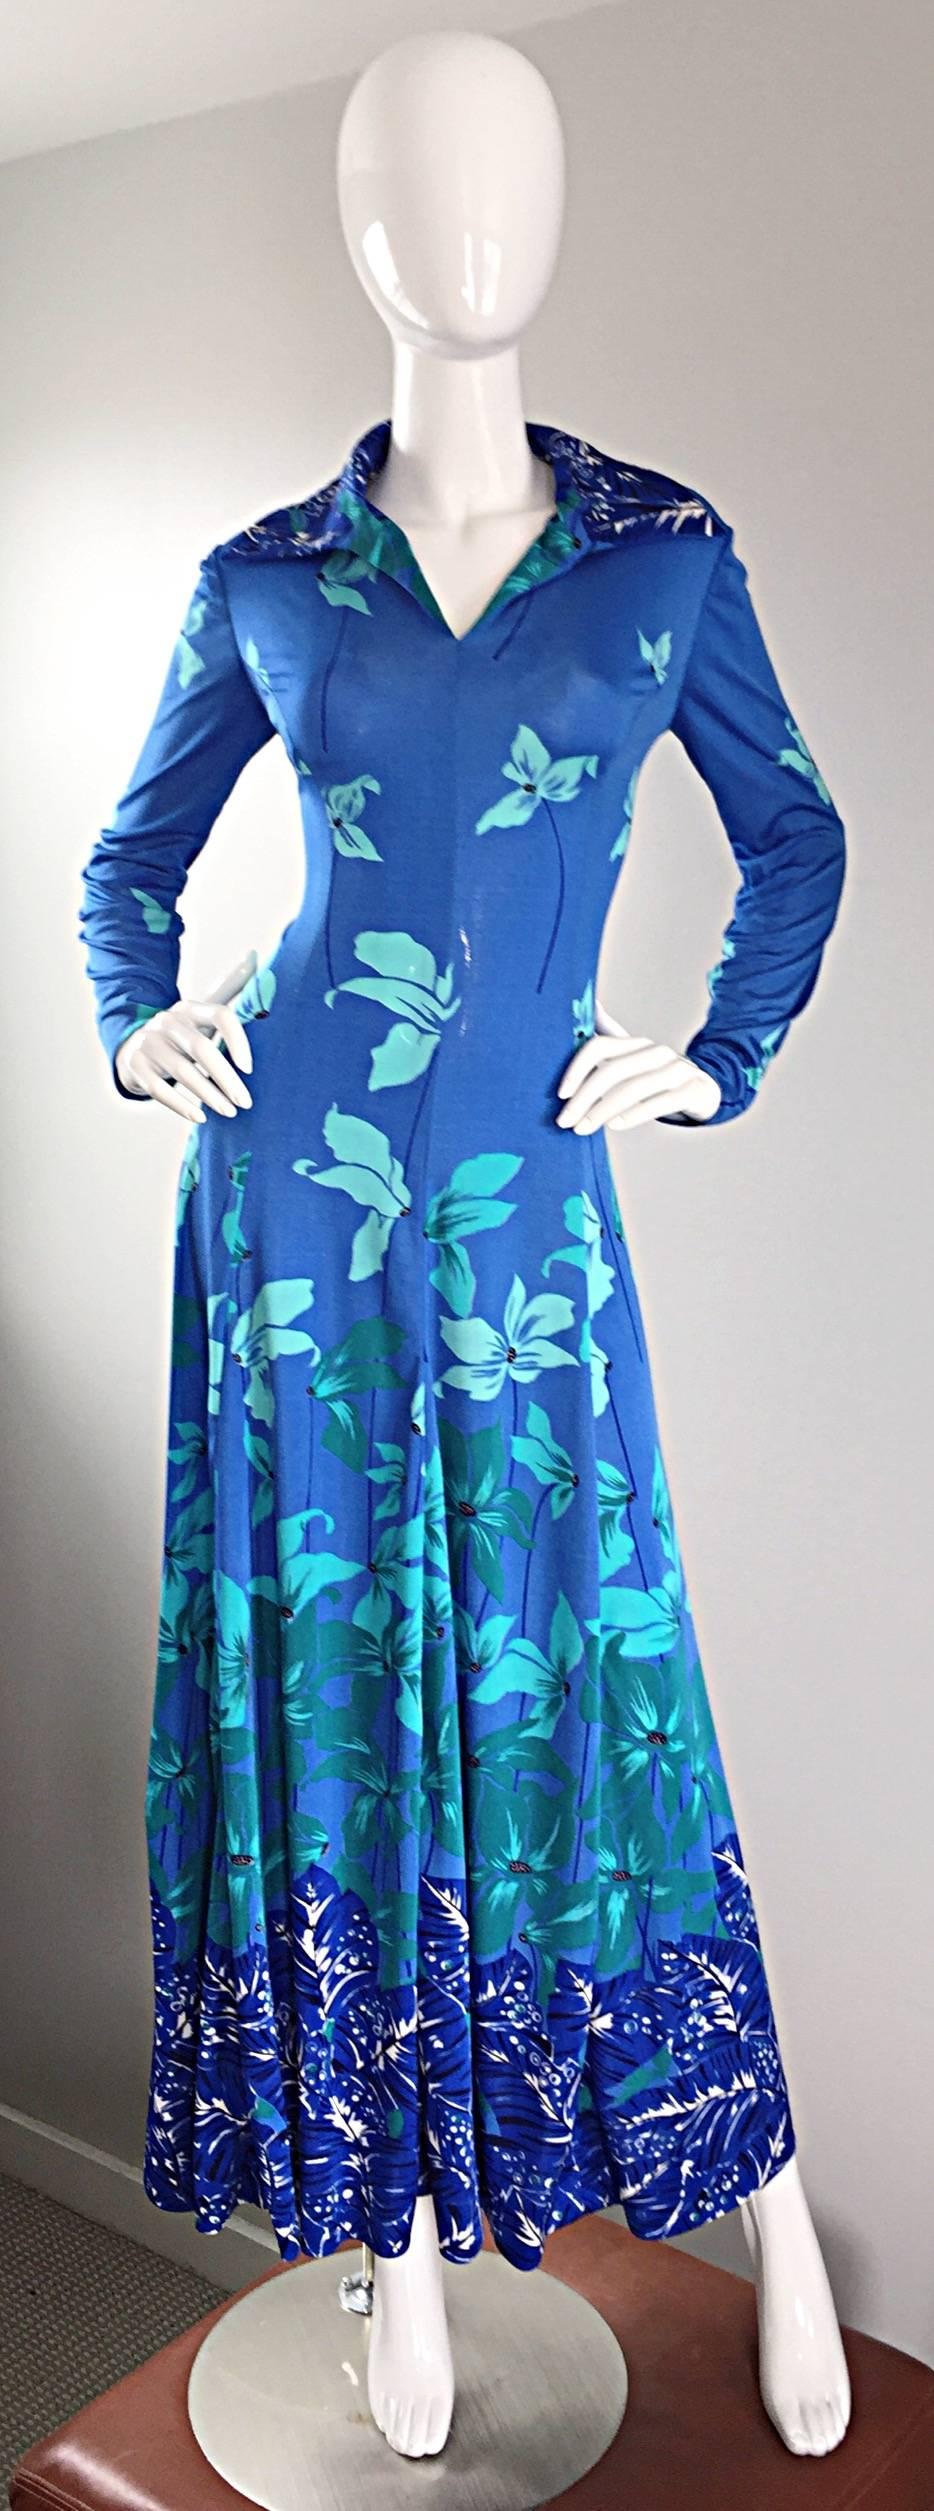 Beautiful Vintage 1970s LA MENDOLA (Made in Italy) turquoise blue silk jersey maxi dress! La Mendola was a sought after label by many Hollywood starlets, including Elizabeth Taylor and Rita Hayworth. This beauty features a wonderful floral print,